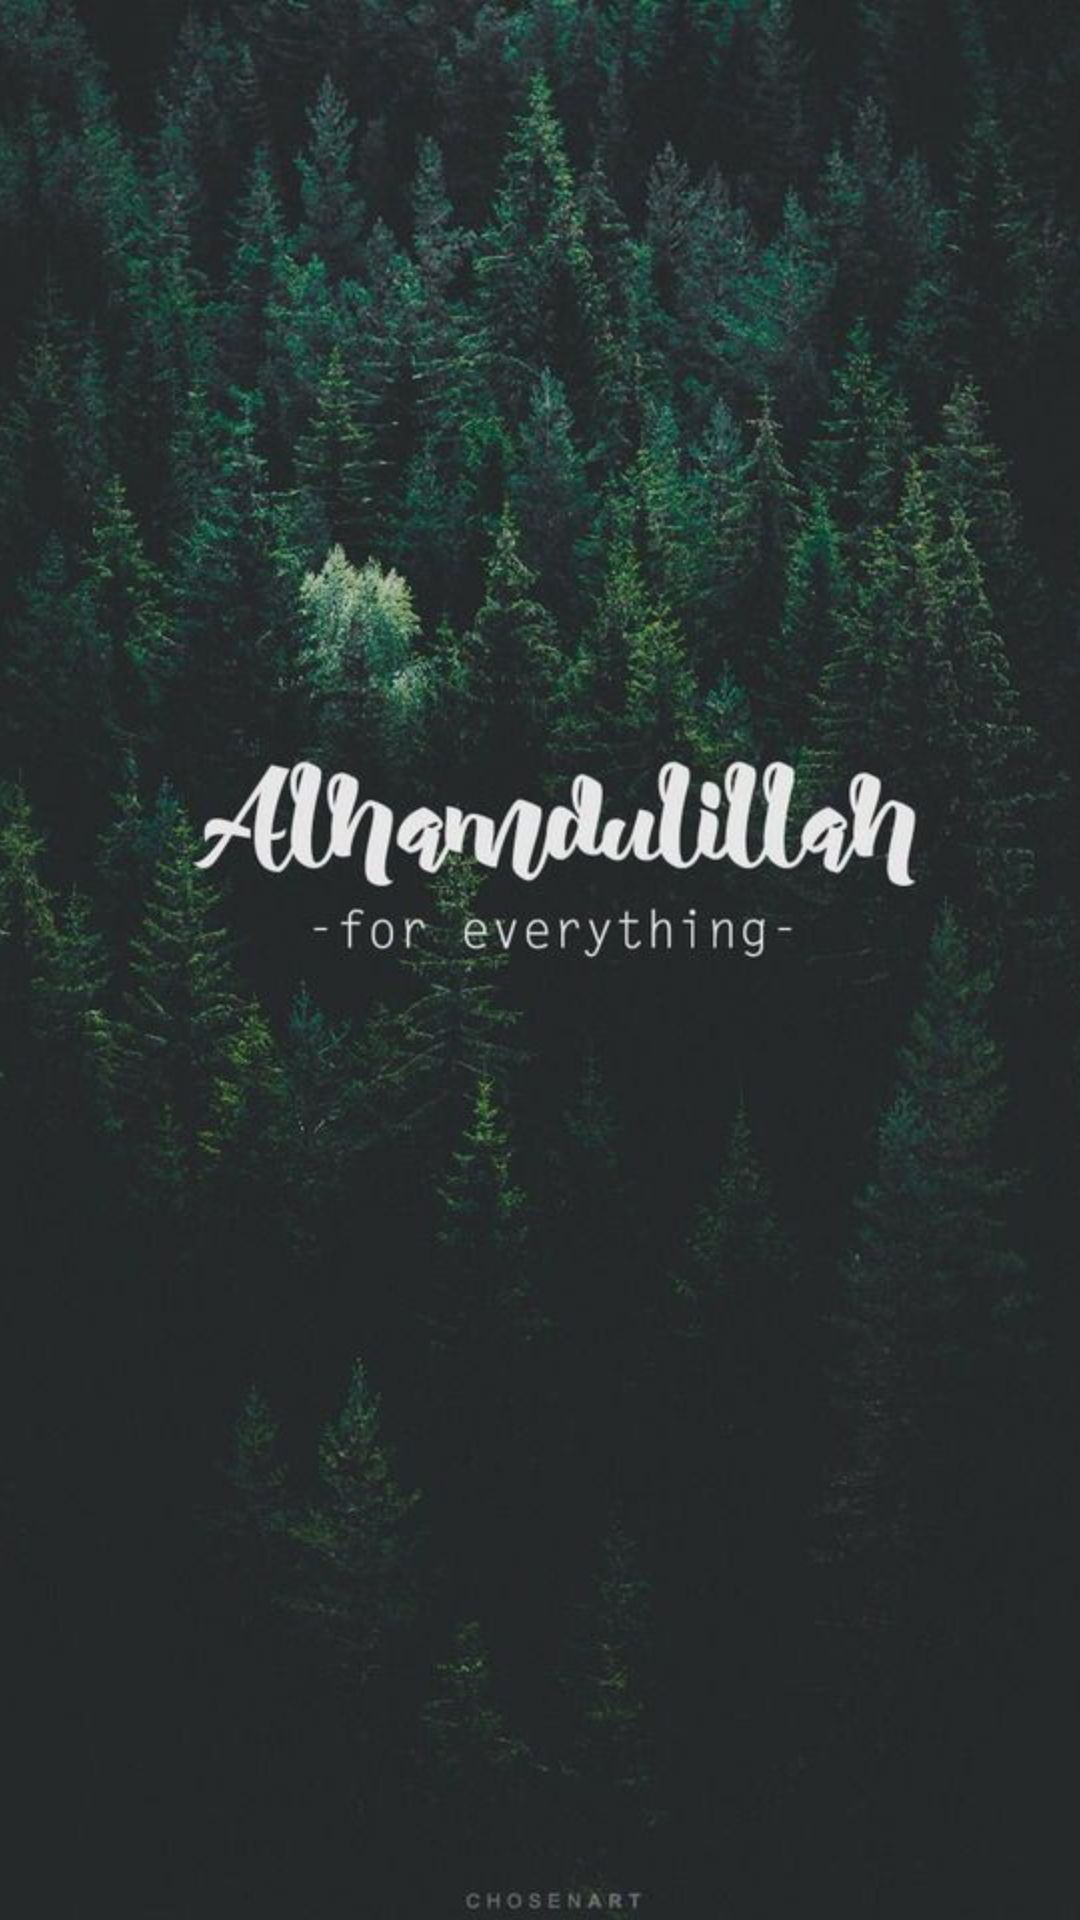 Alhamdulillah Wallpapers - Top 35 Best Alhamdulillah Backgrounds Download